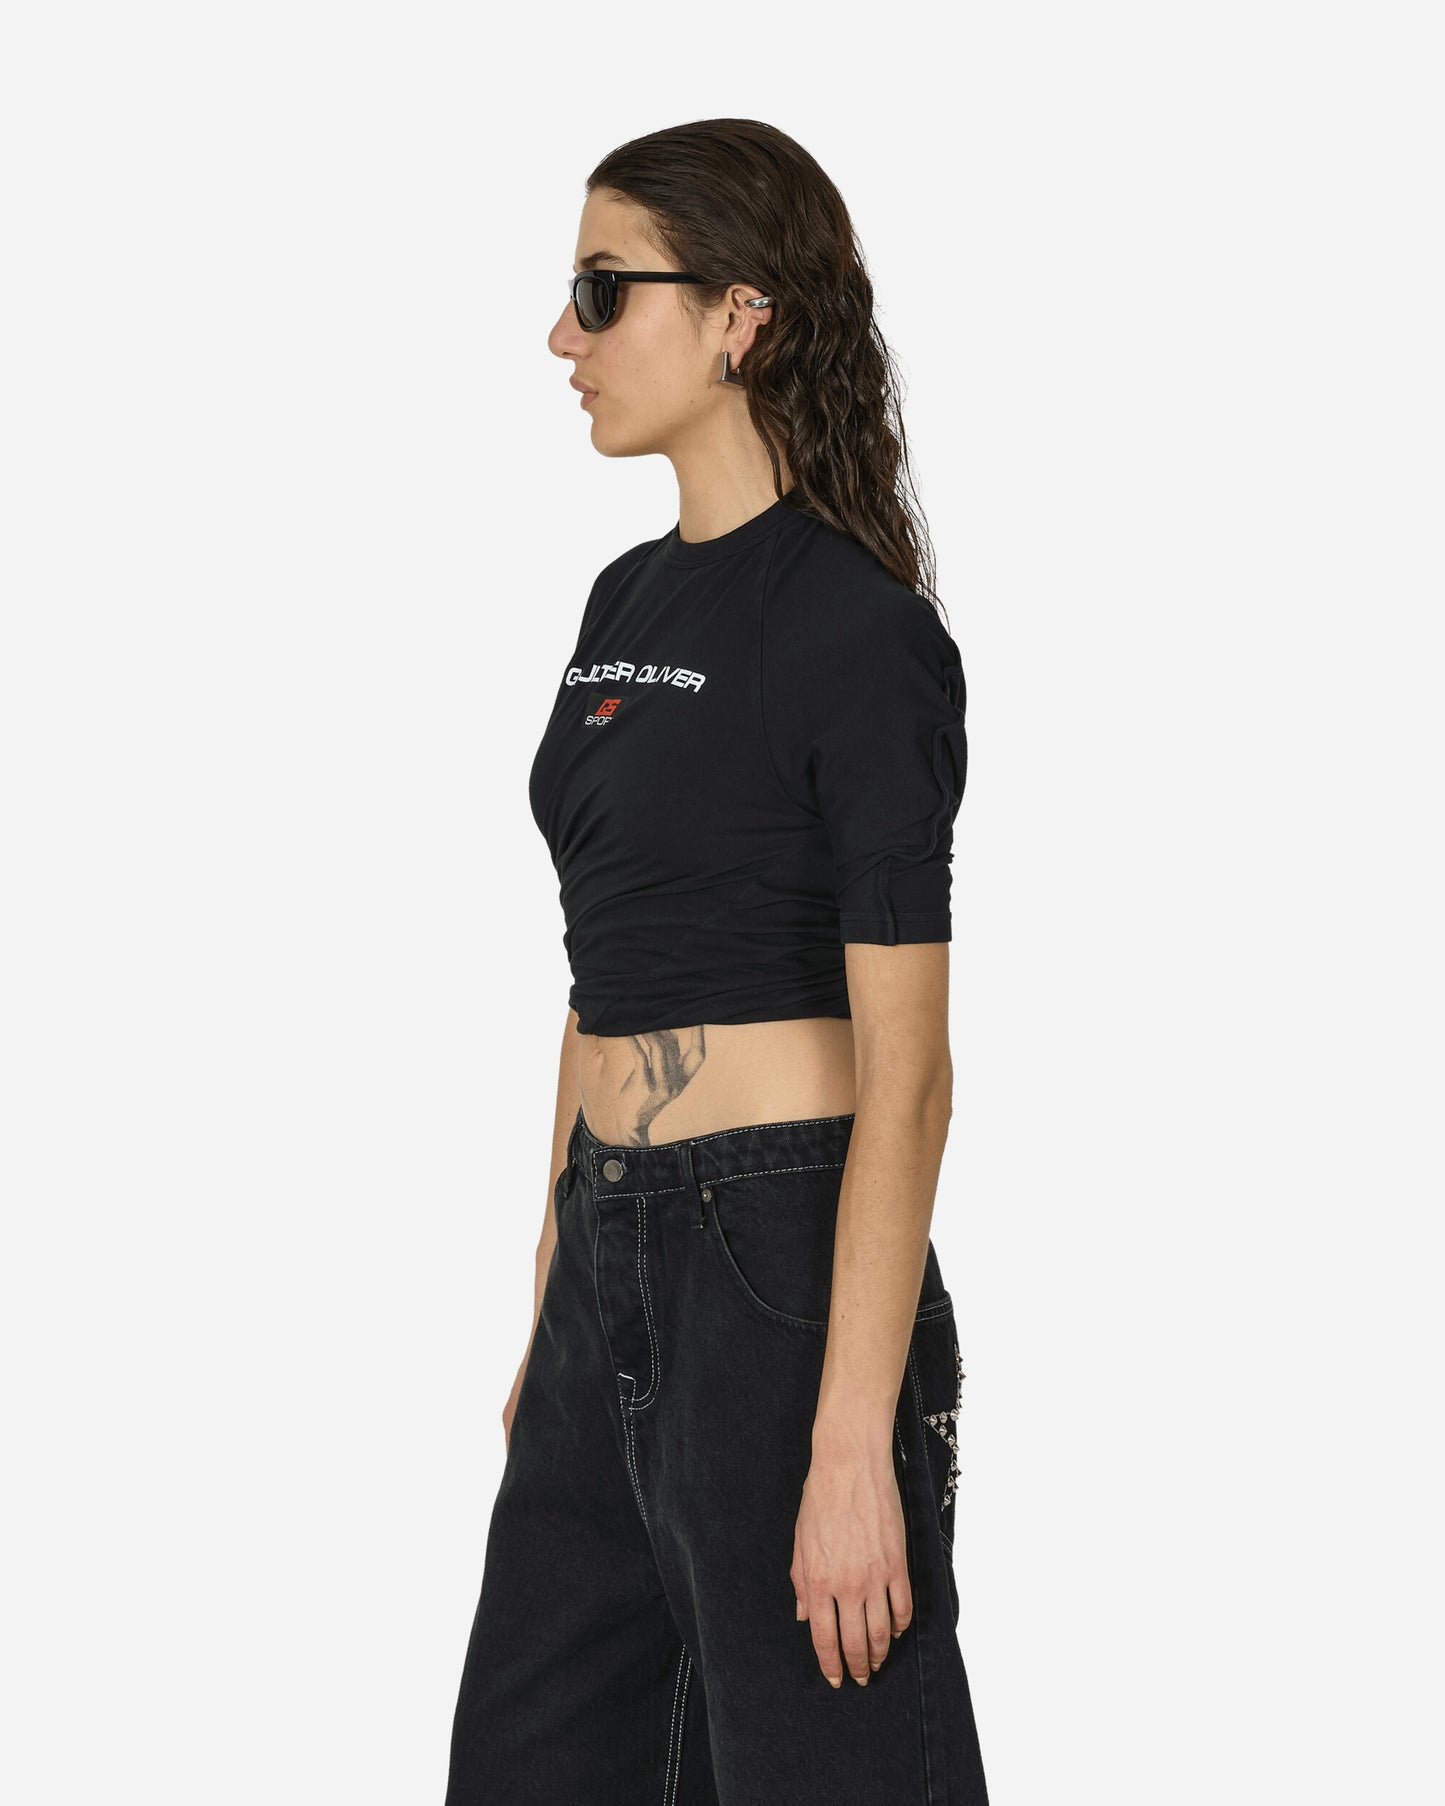 Jean Paul Gaultier Wmns Jersey Twisted Ringer Tee With Breast Faded Black T-Shirts Shortsleeve TS070I-J062 00A